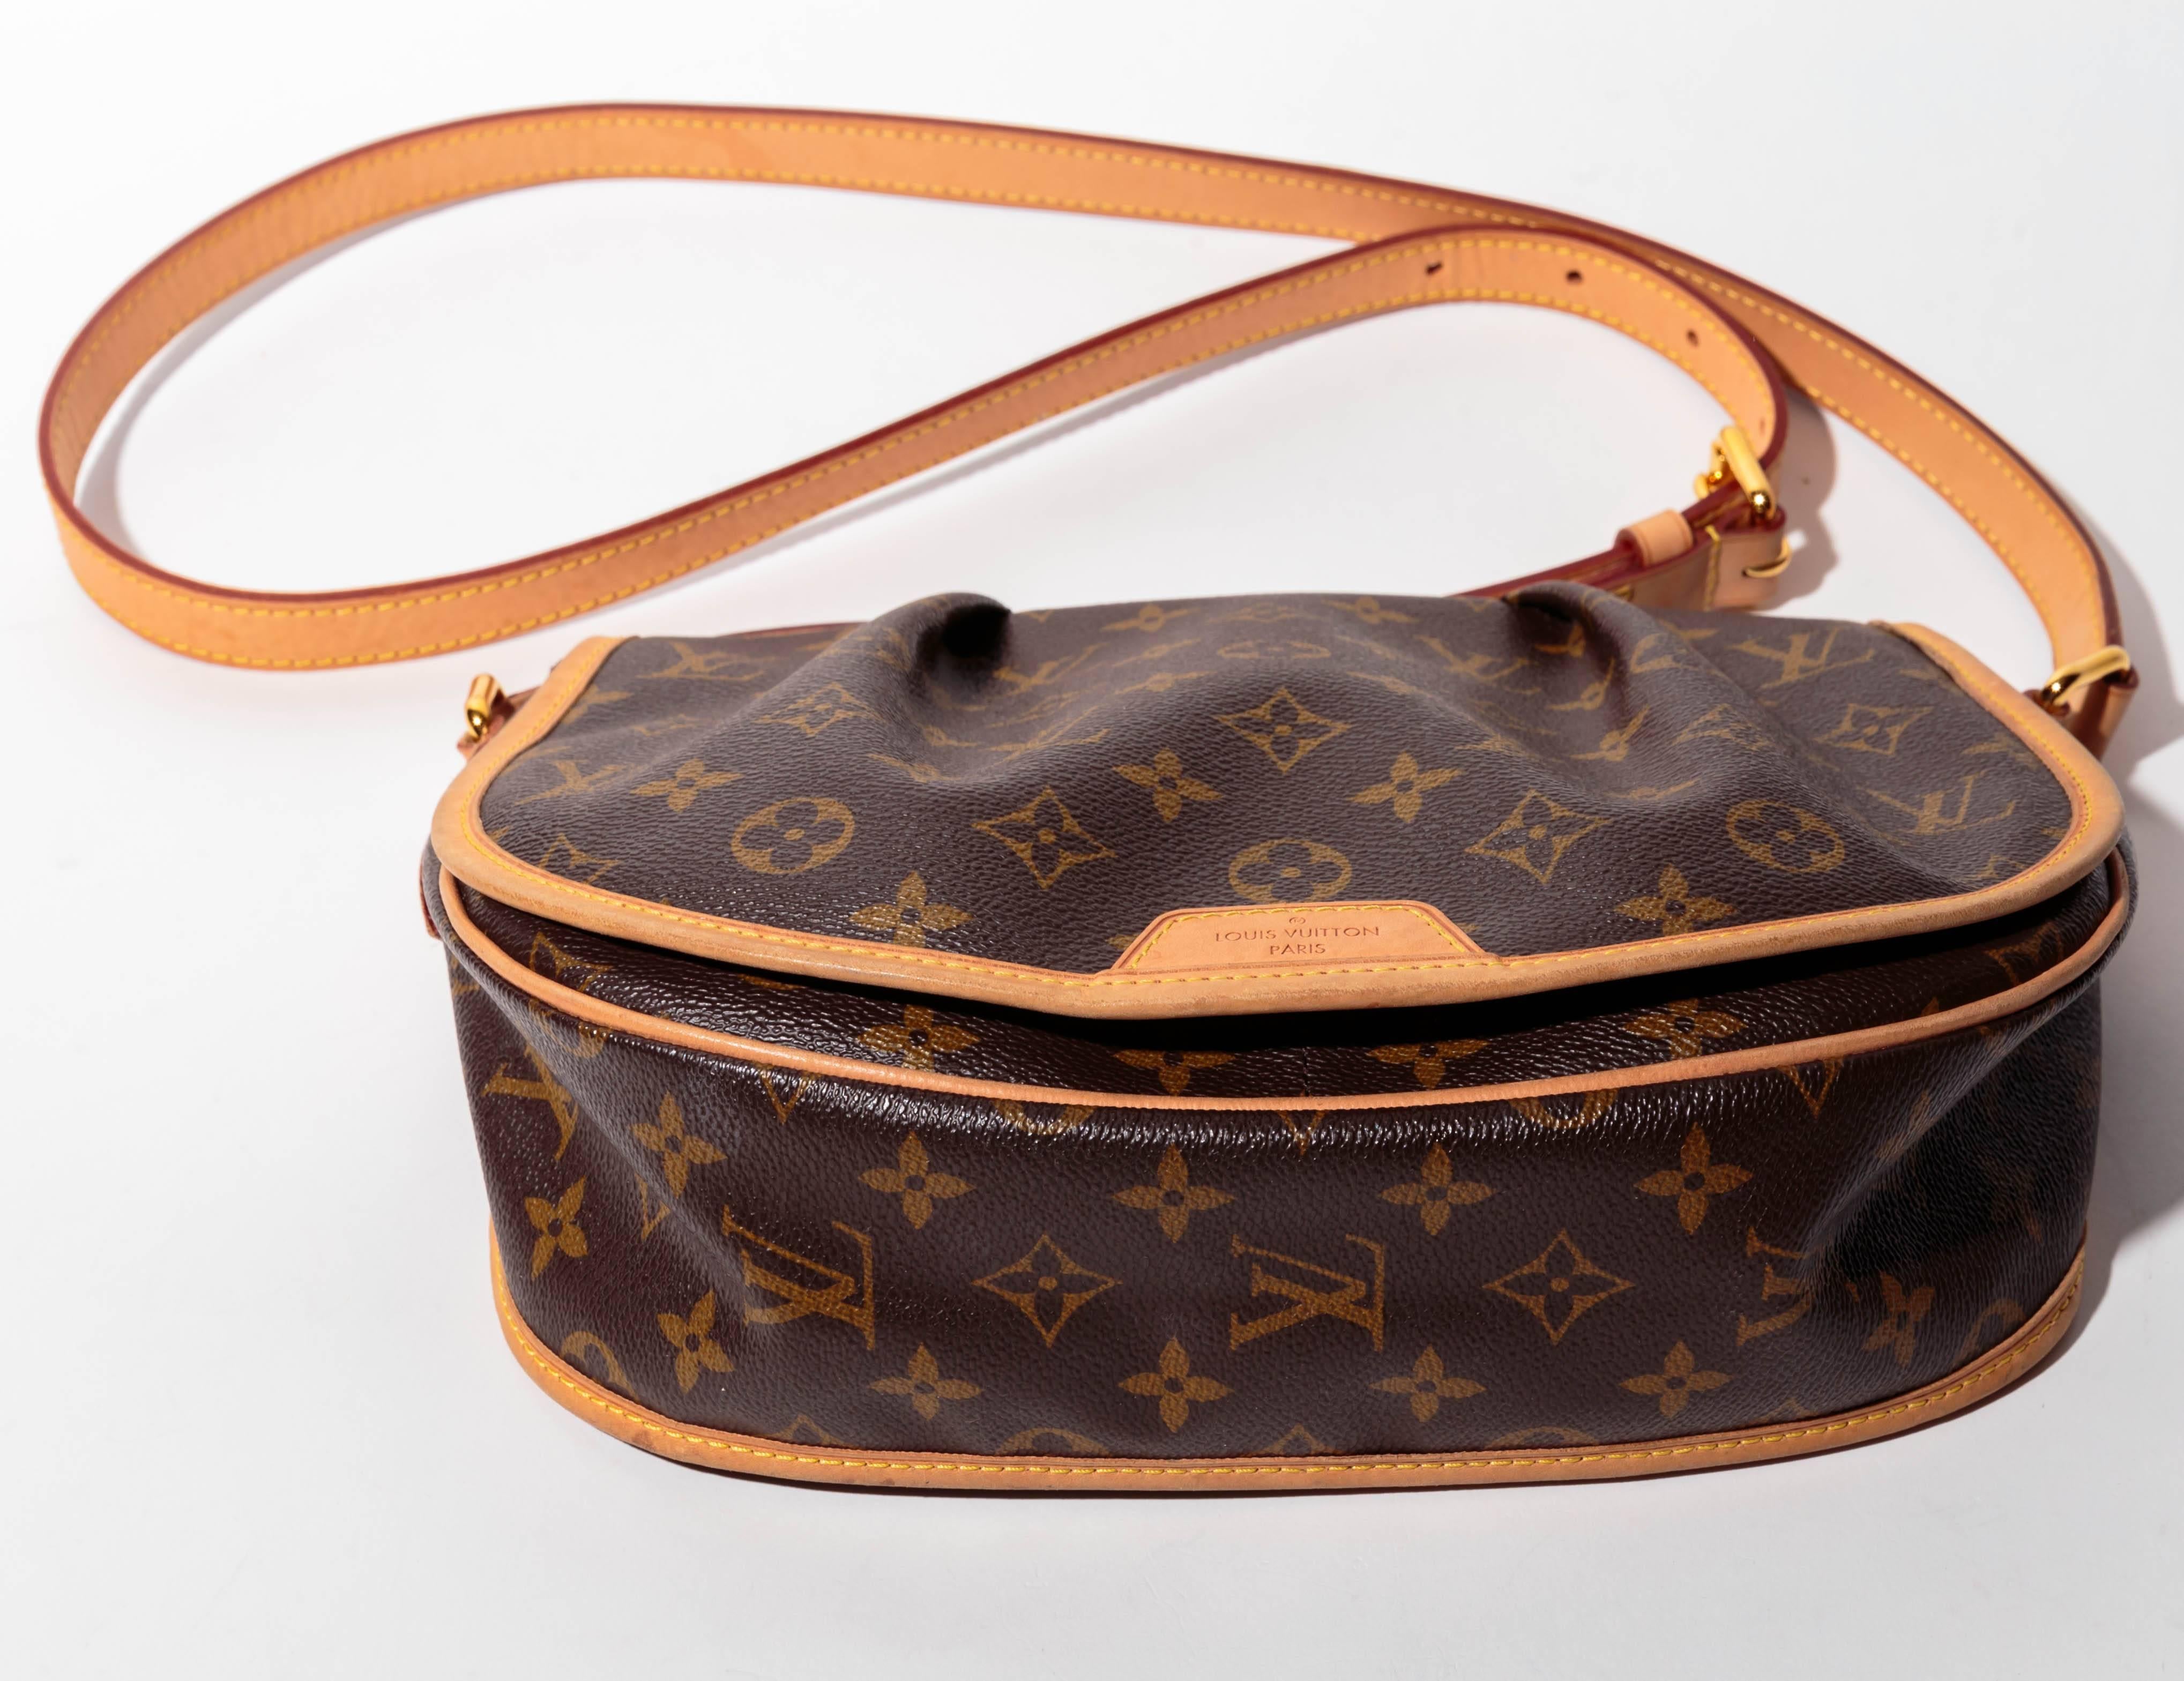 Louis Vuitton monogram coated canvas Louis Vuitton Menilmontant GM with brass hardware and tan vachetta leather trim
Single adjustable crossbody shoulder strap
Large interior compartment with one zip pocket
Brown canvas lining / excellent